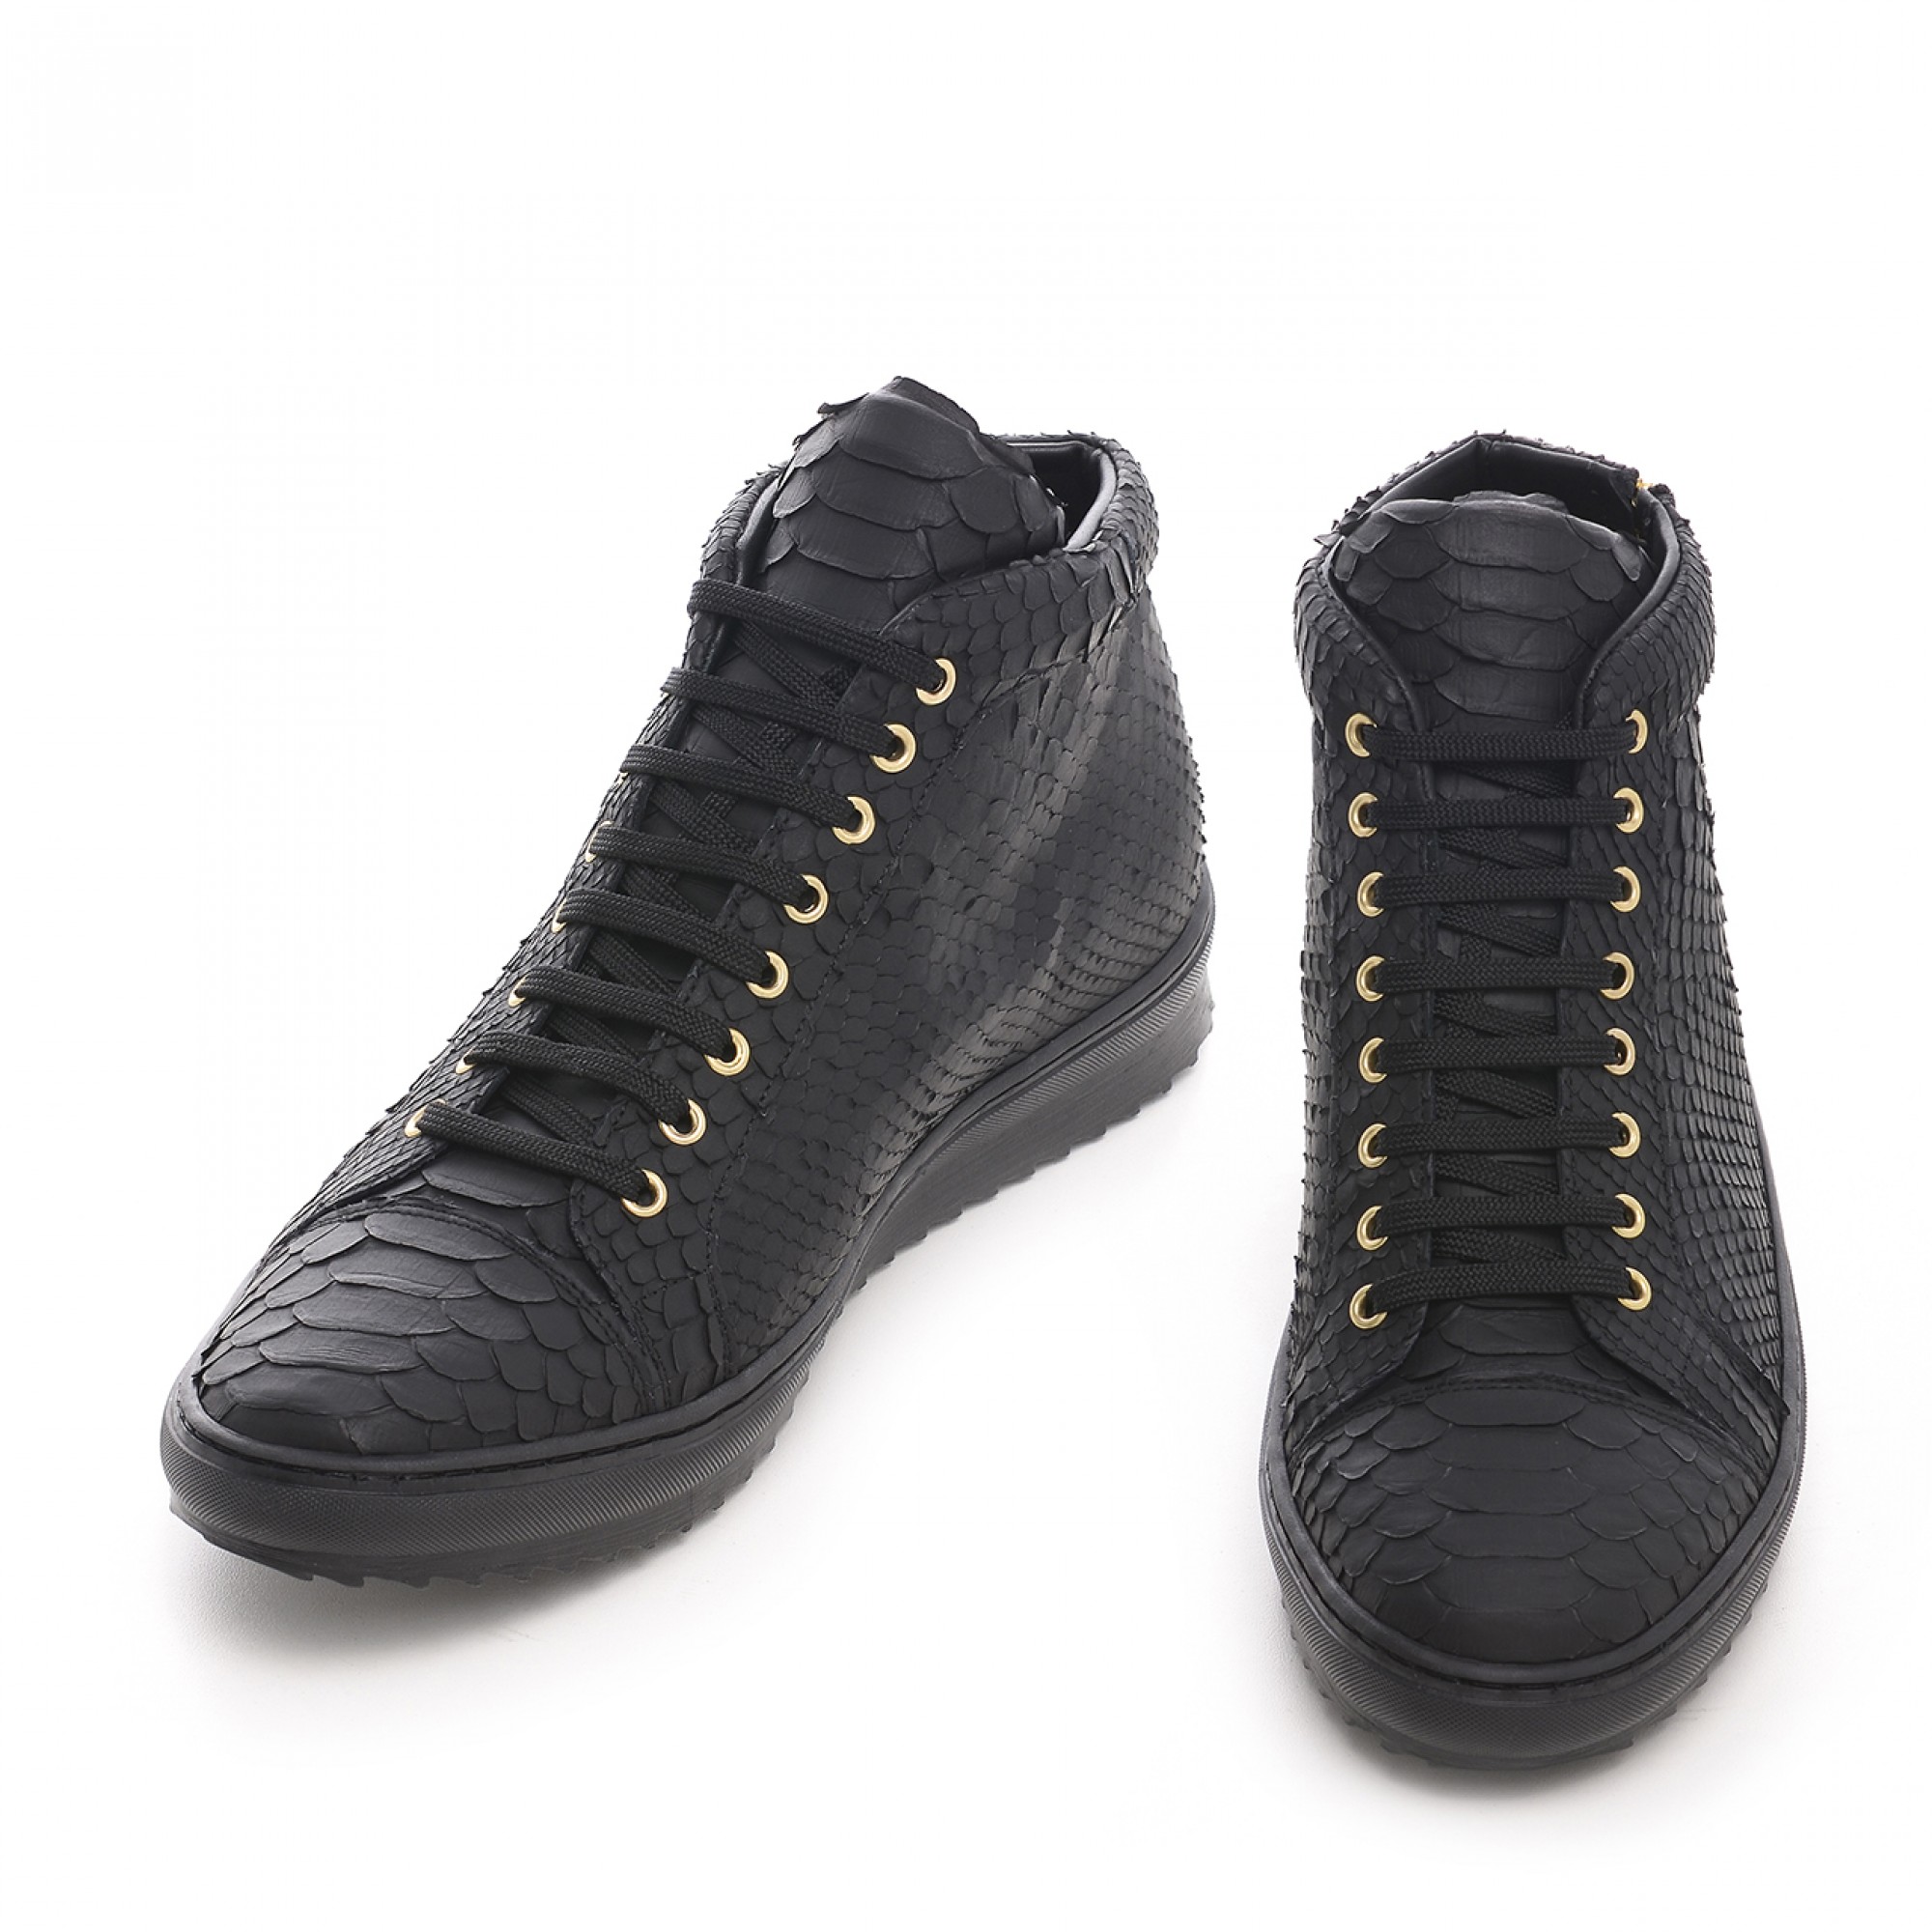 Delano - Elevator Sneakers in Python Leather from 2.4 to 3.1 inches